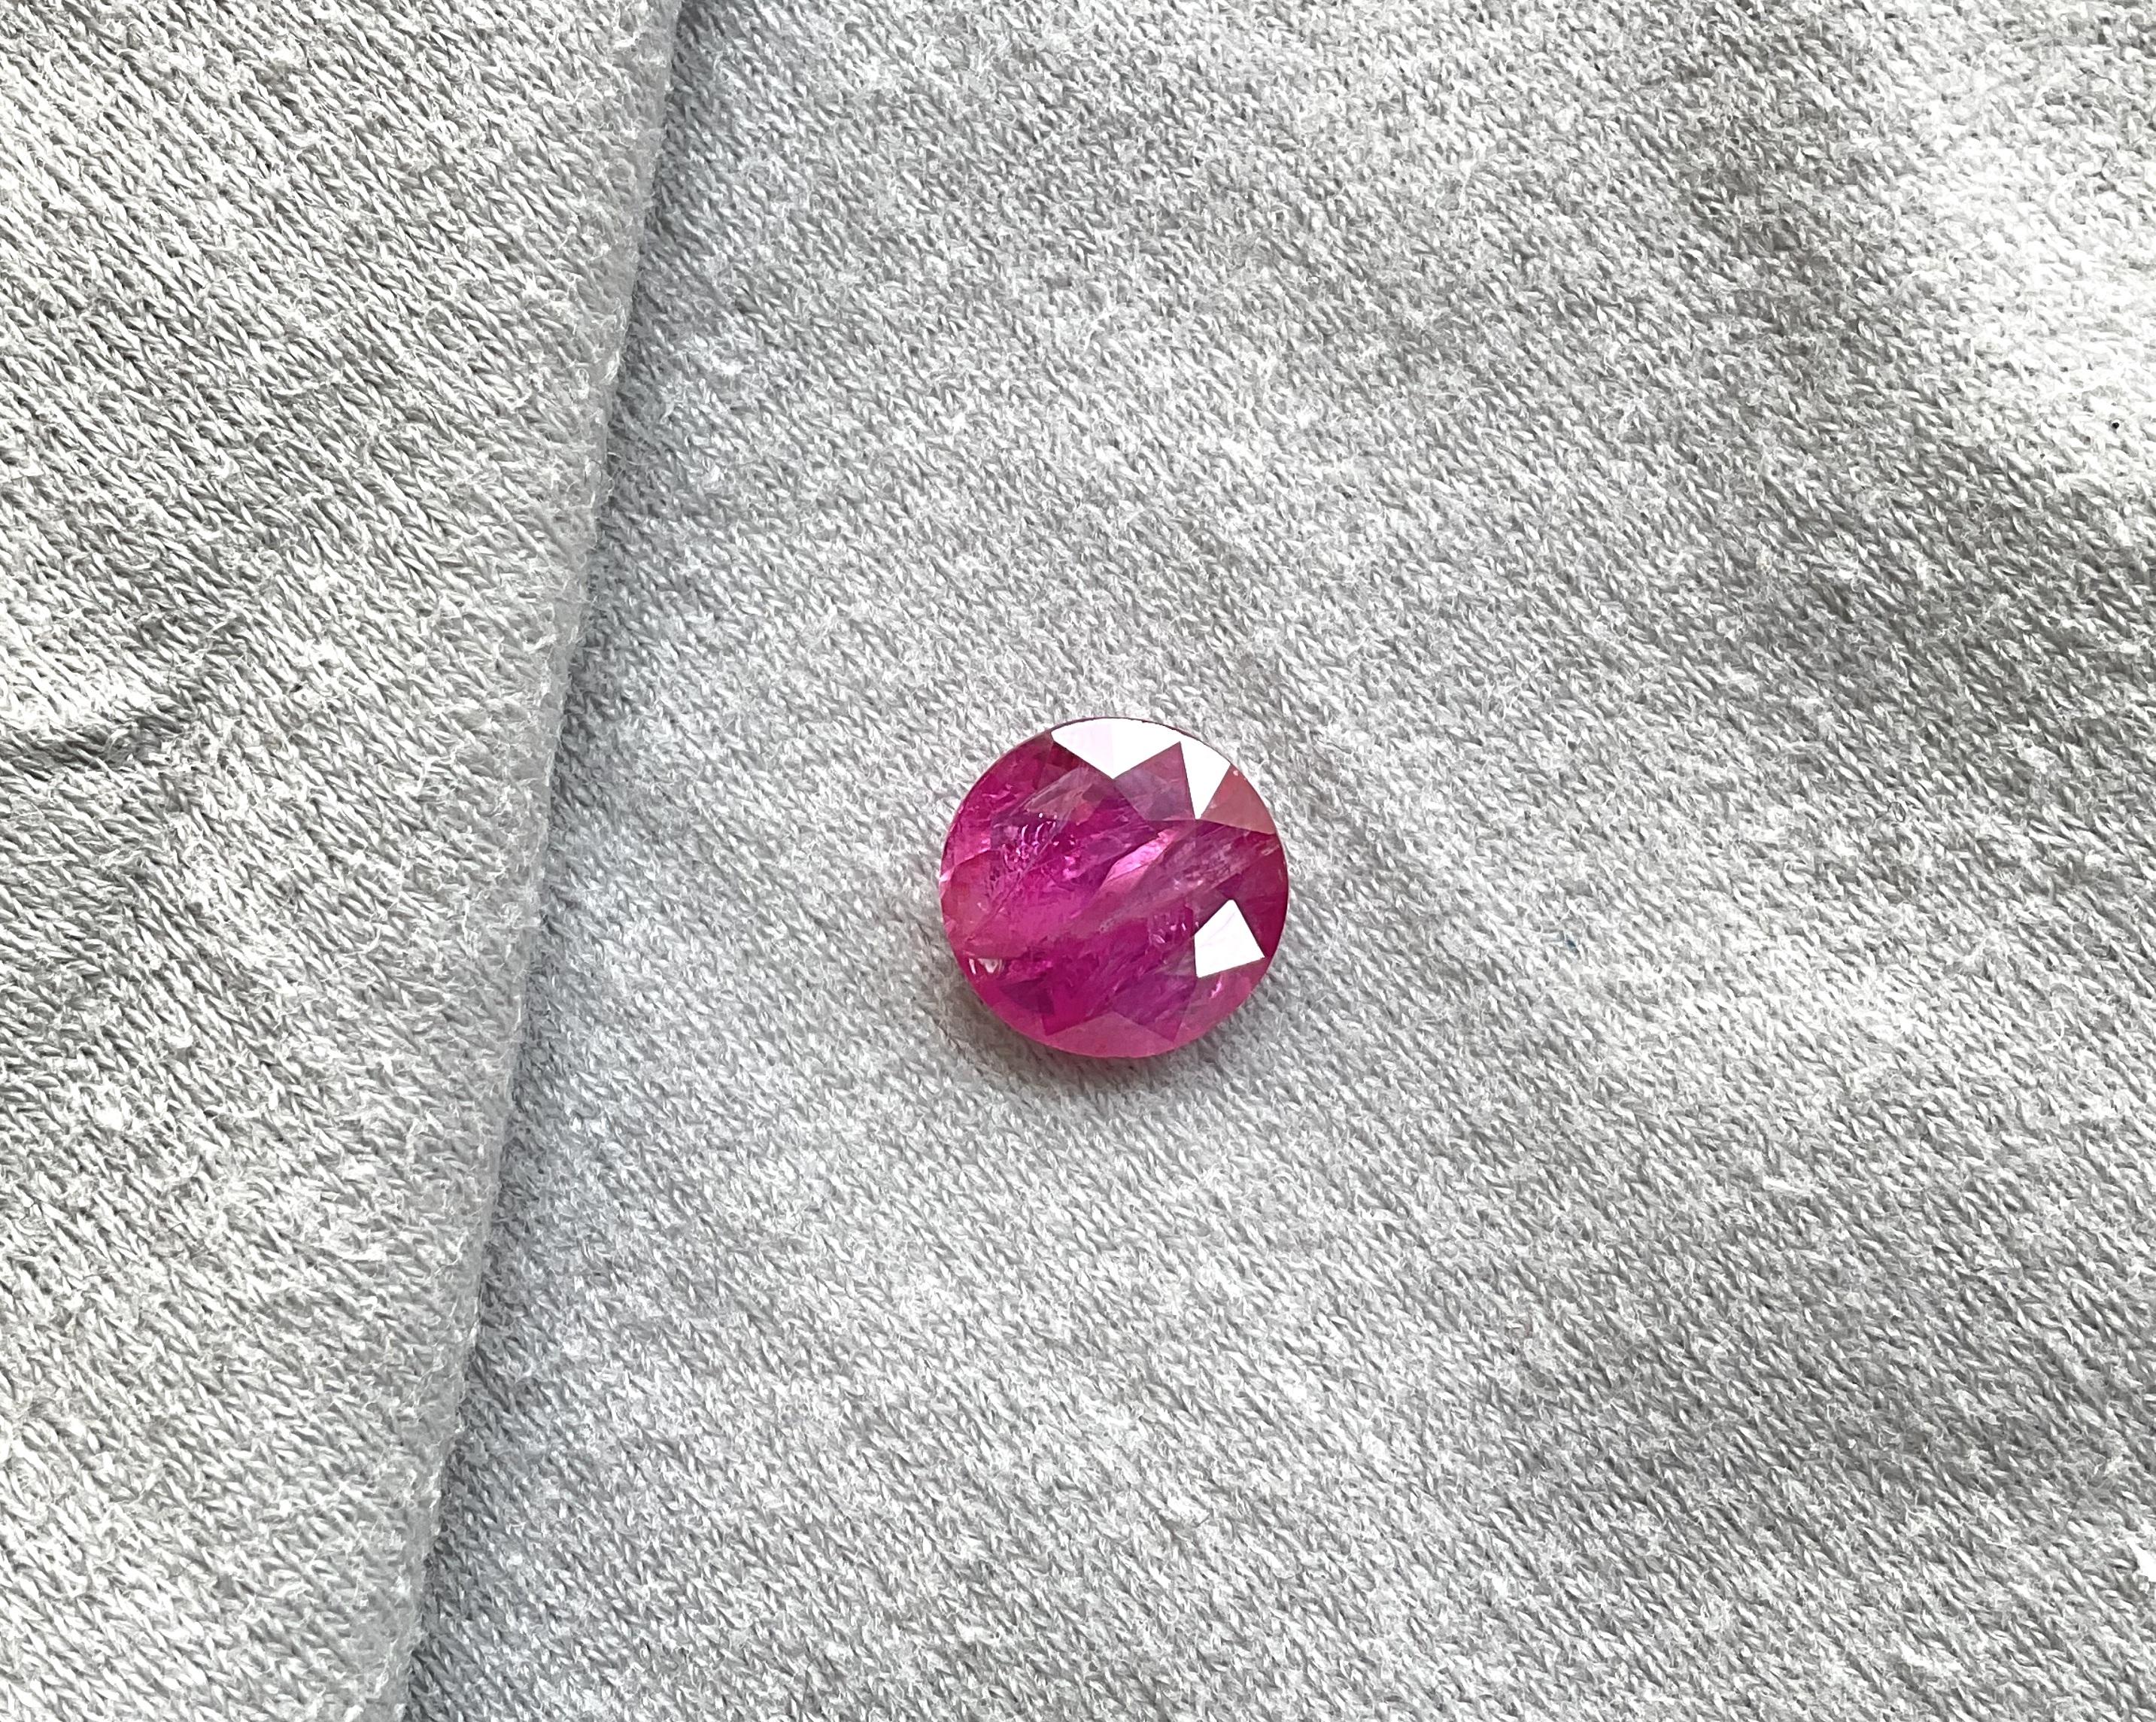 As we are auction partners at Gemfields, we have sourced these rubies from winning auctions and had cut them in our in house manufacturing responsibly.

Weight: 5.10 Carats
Size: 11x5 MM
Pieces: 1
Shape: Faceted Round Cur stone